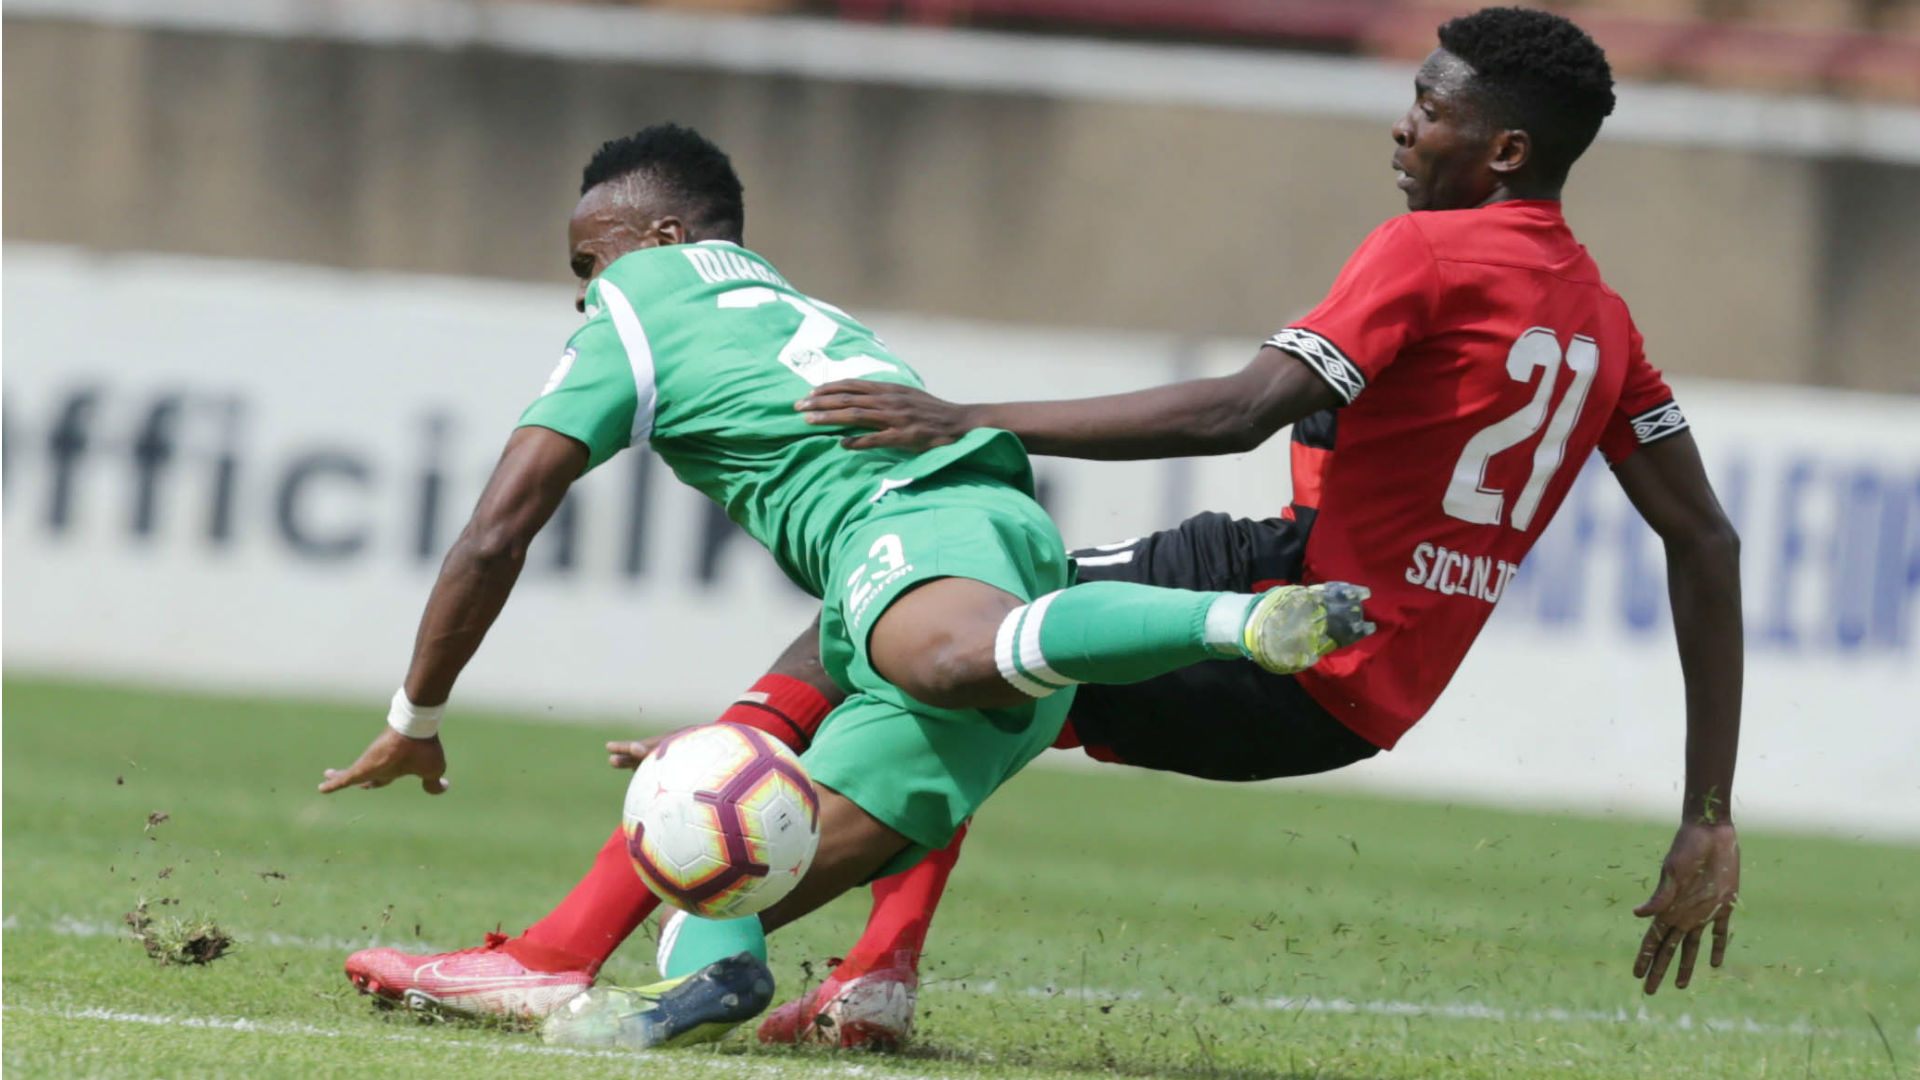 Superior AFC Leopards should not be losing to Gor Mahia - Okwemba